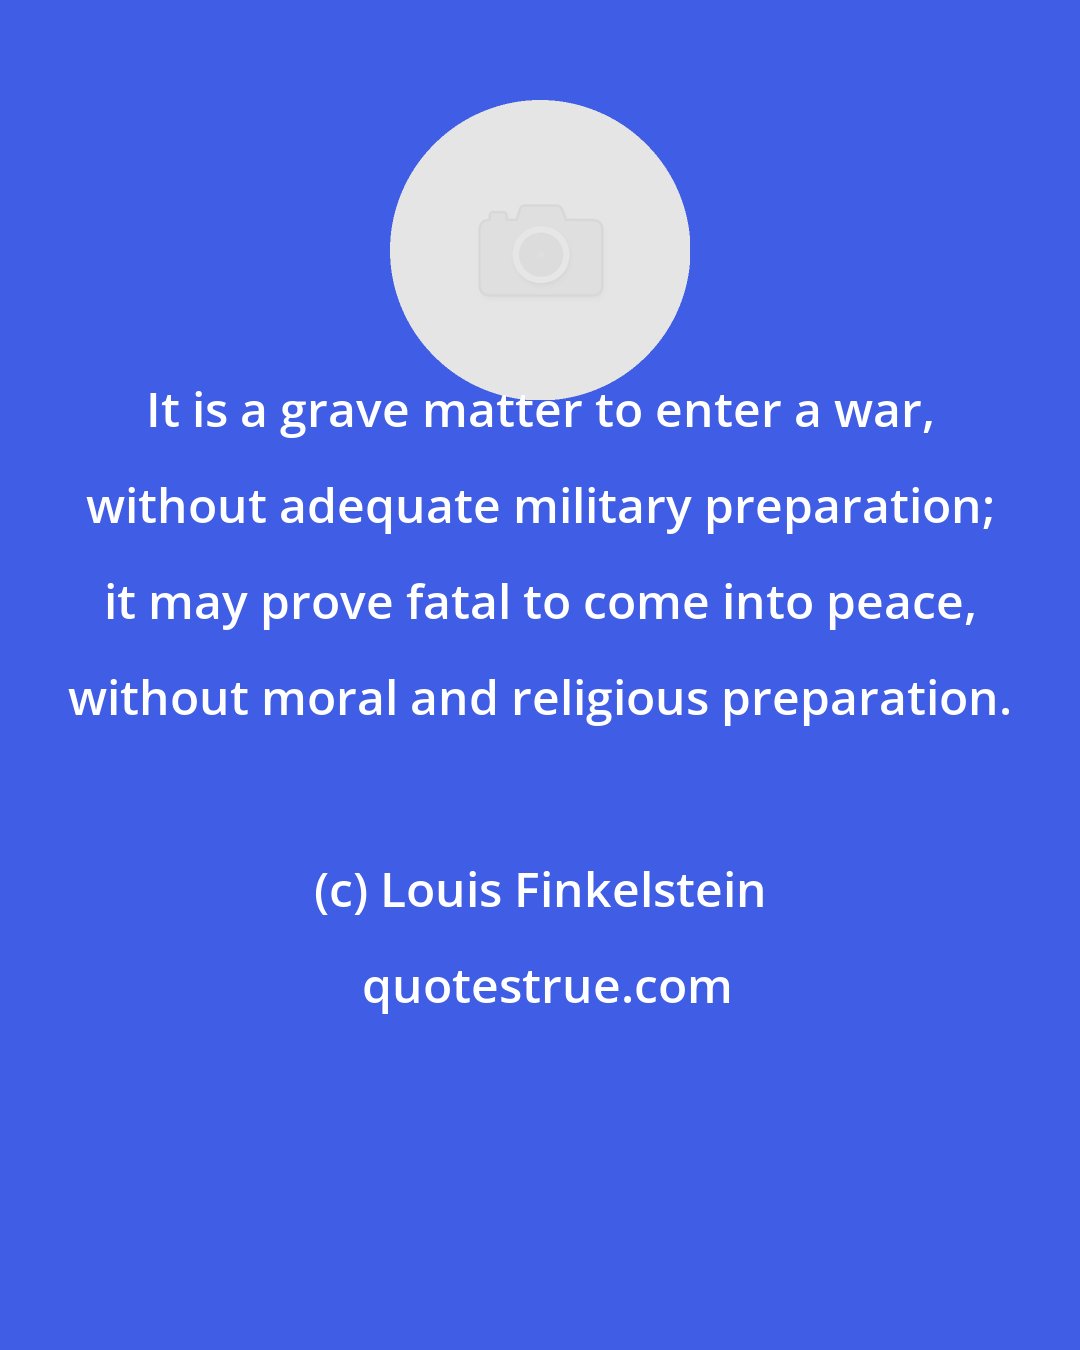 Louis Finkelstein: It is a grave matter to enter a war, without adequate military preparation; it may prove fatal to come into peace, without moral and religious preparation.